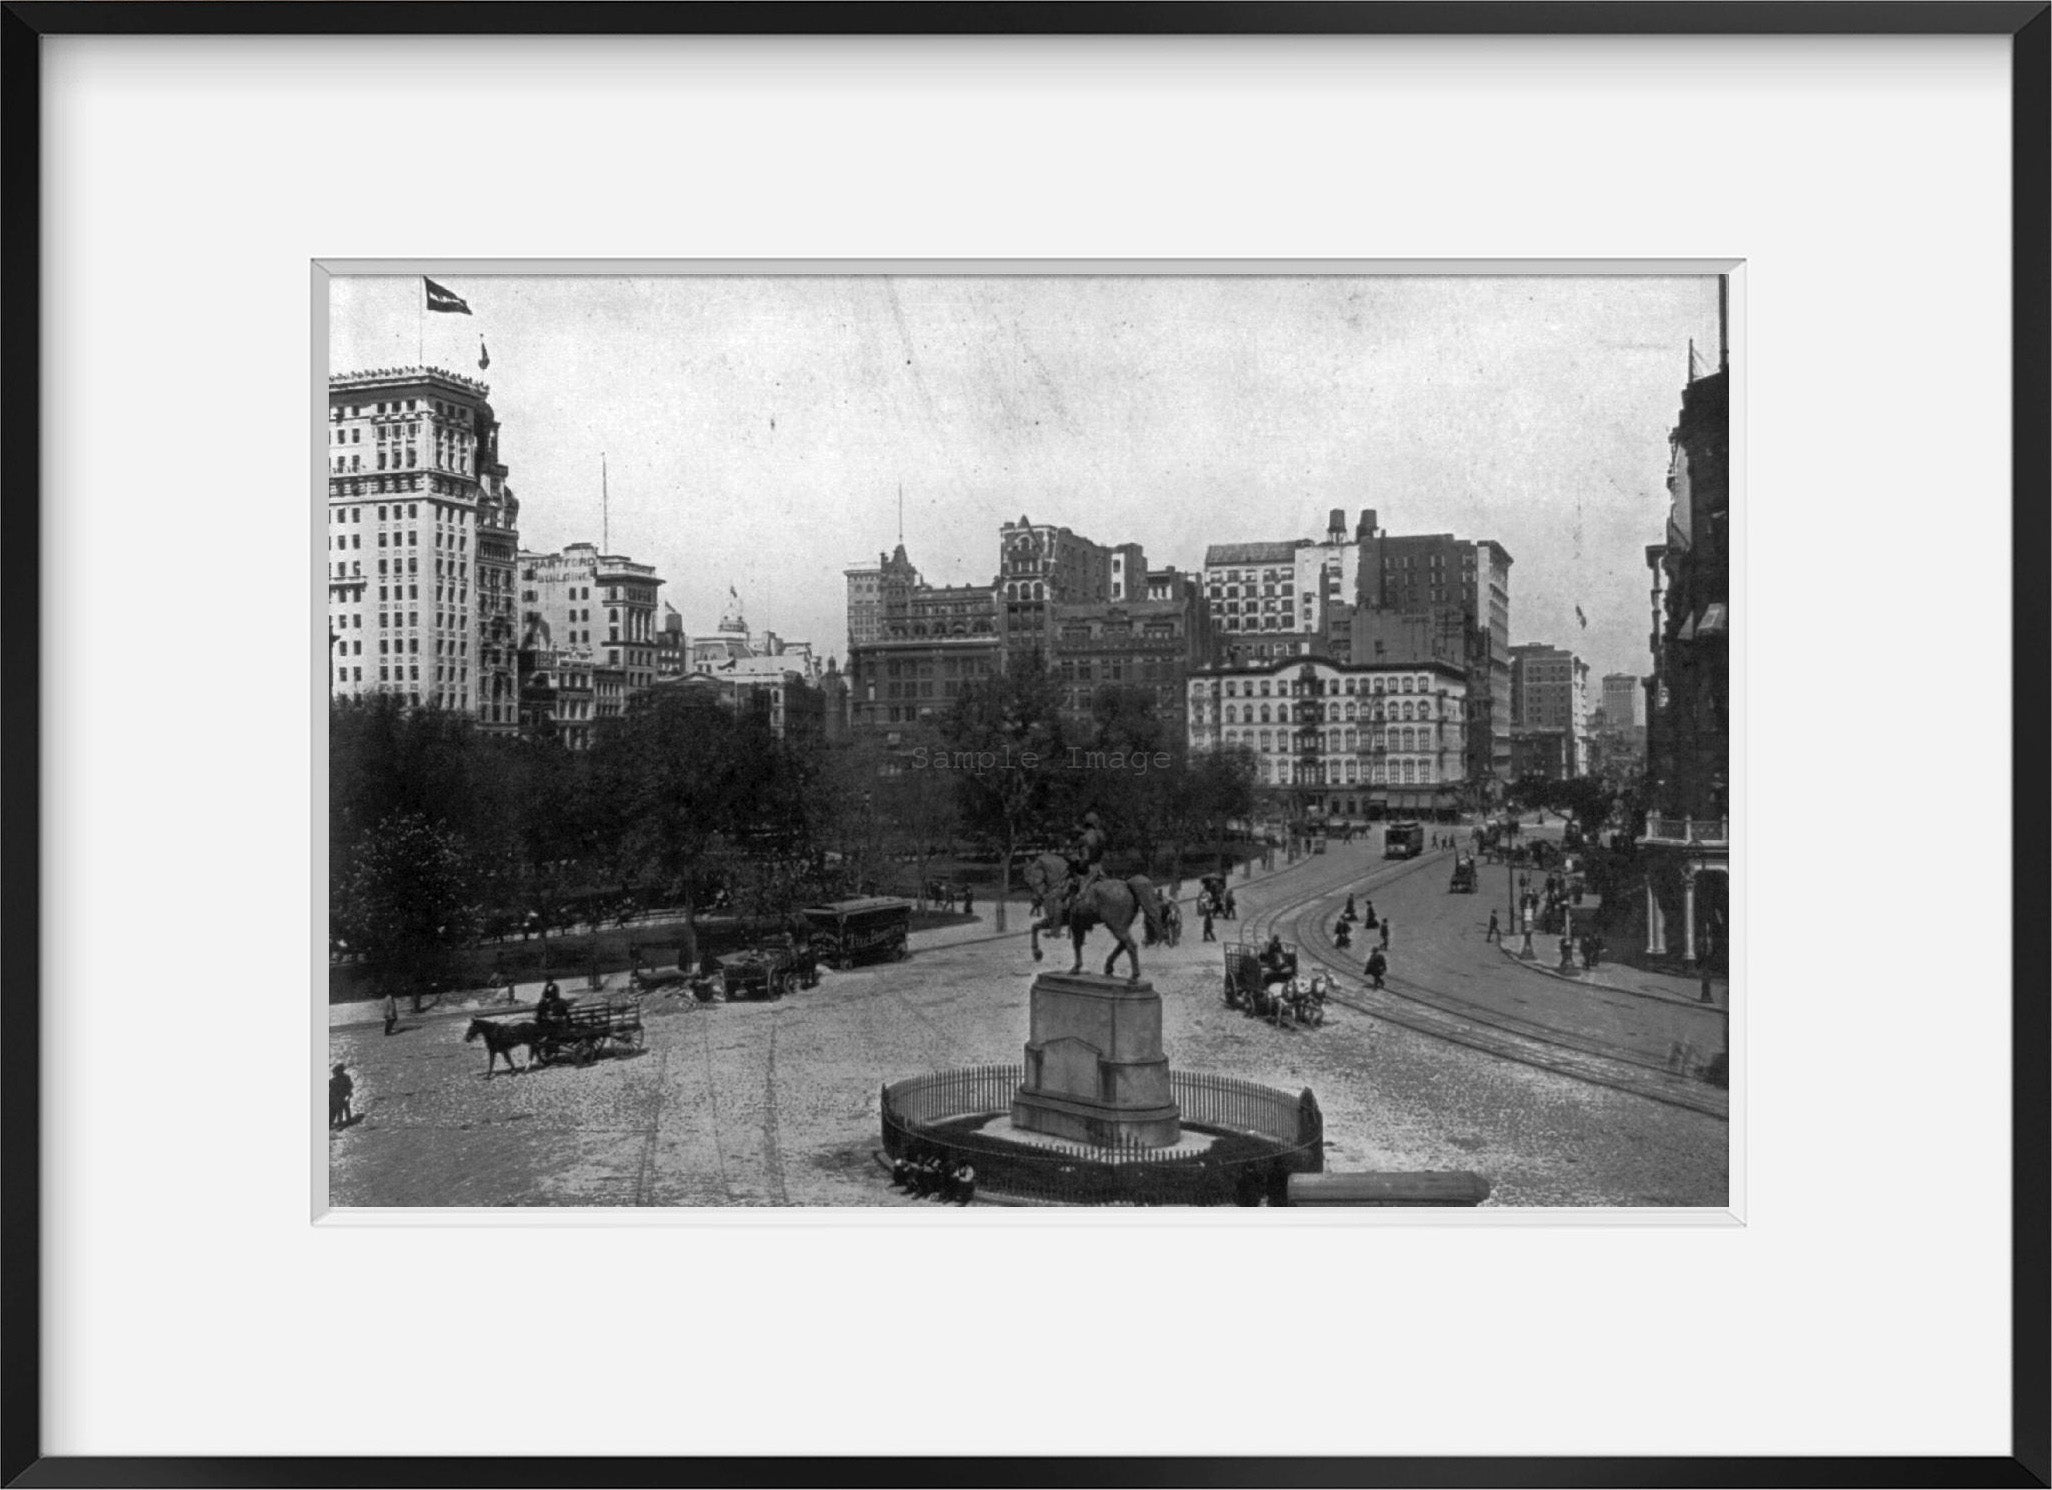 ca. 1905 photograph of Union Square, New York City: Washington Satue in foregrd.